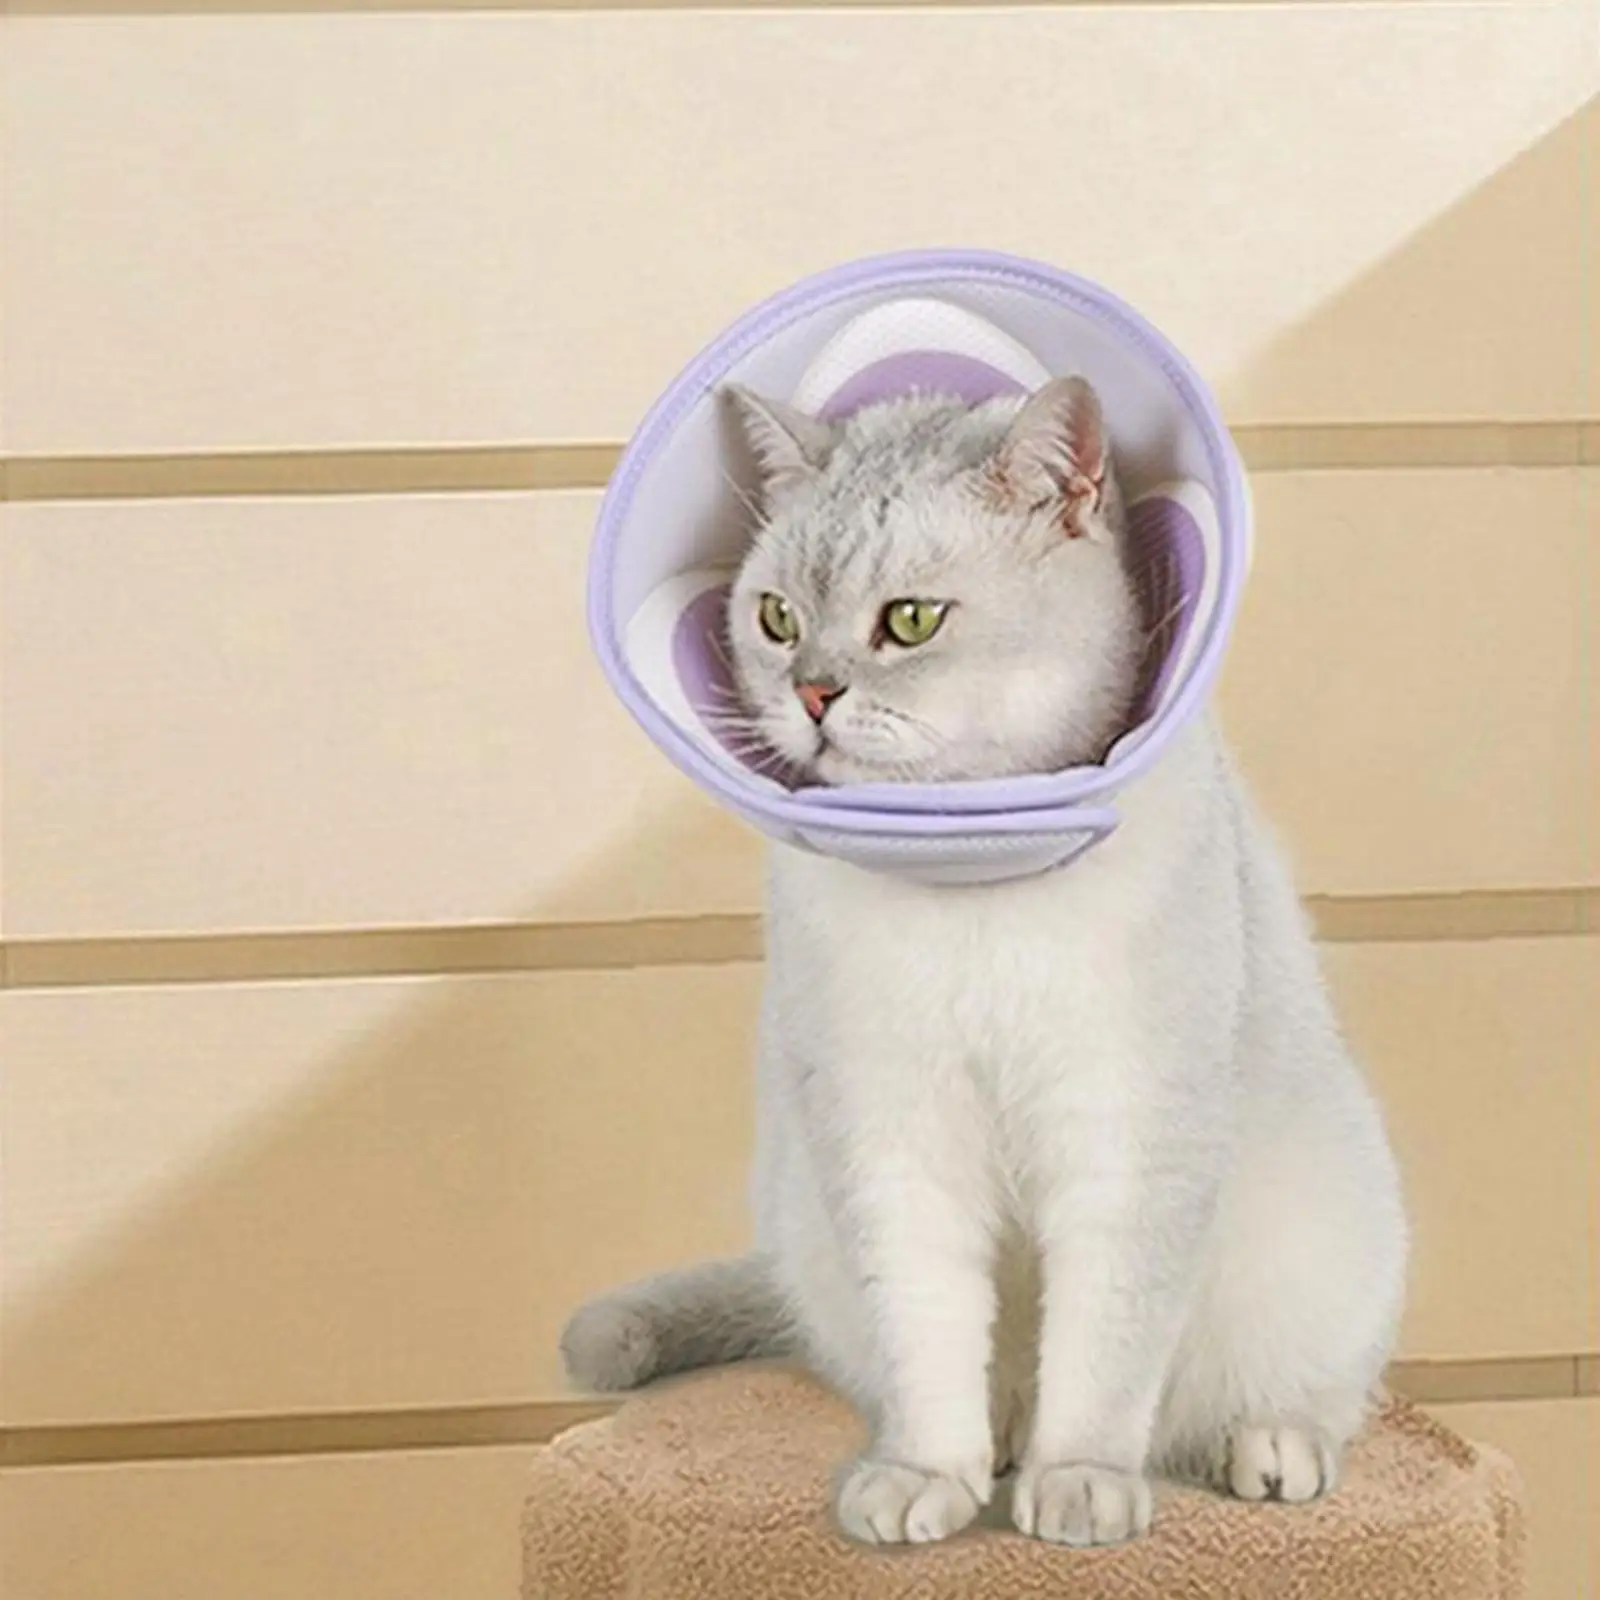 Cat Cone Anti Scratching Easy to Wear Soft Adjustable Mesh Fabric Dog Cone for Cat Trimming Pet Bathing Small Dogs Kittens Cats